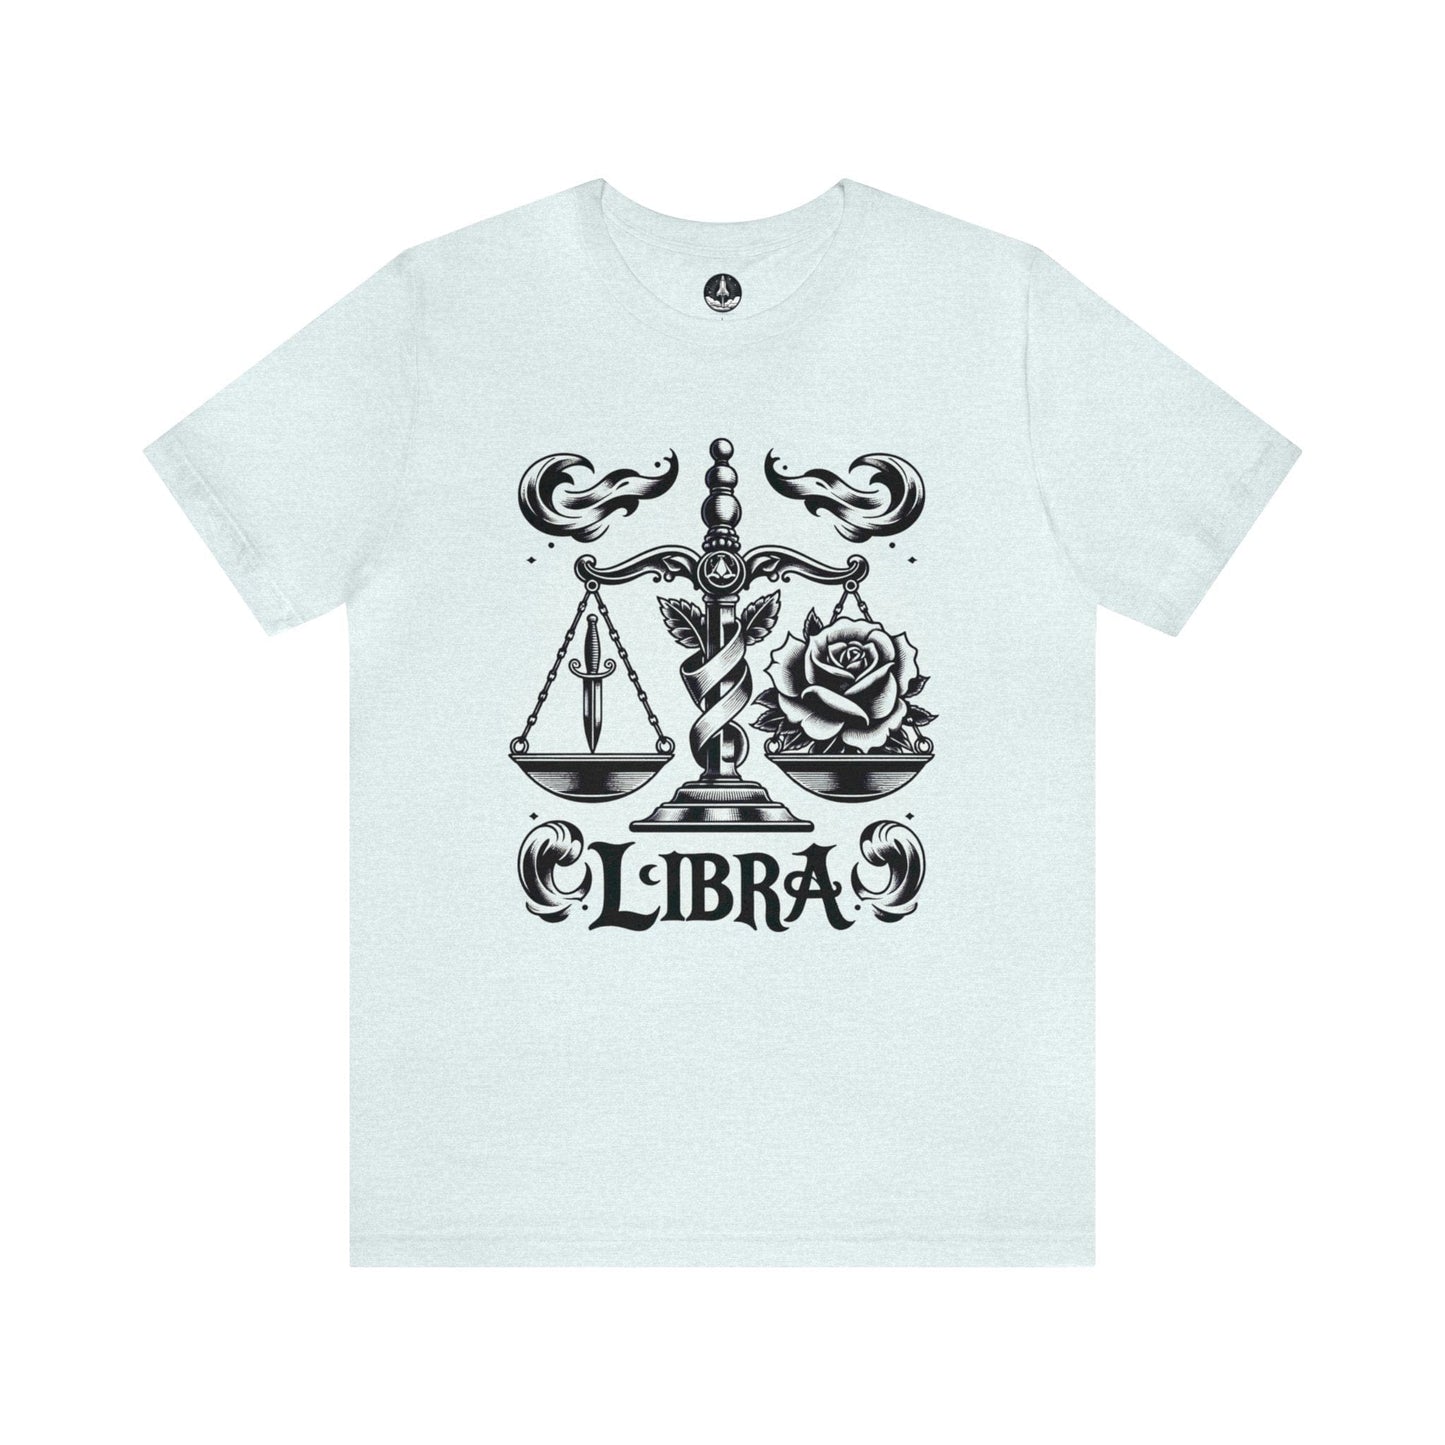 T-Shirt Heather Ice Blue / S Scales & Roses Libra T-Shirt